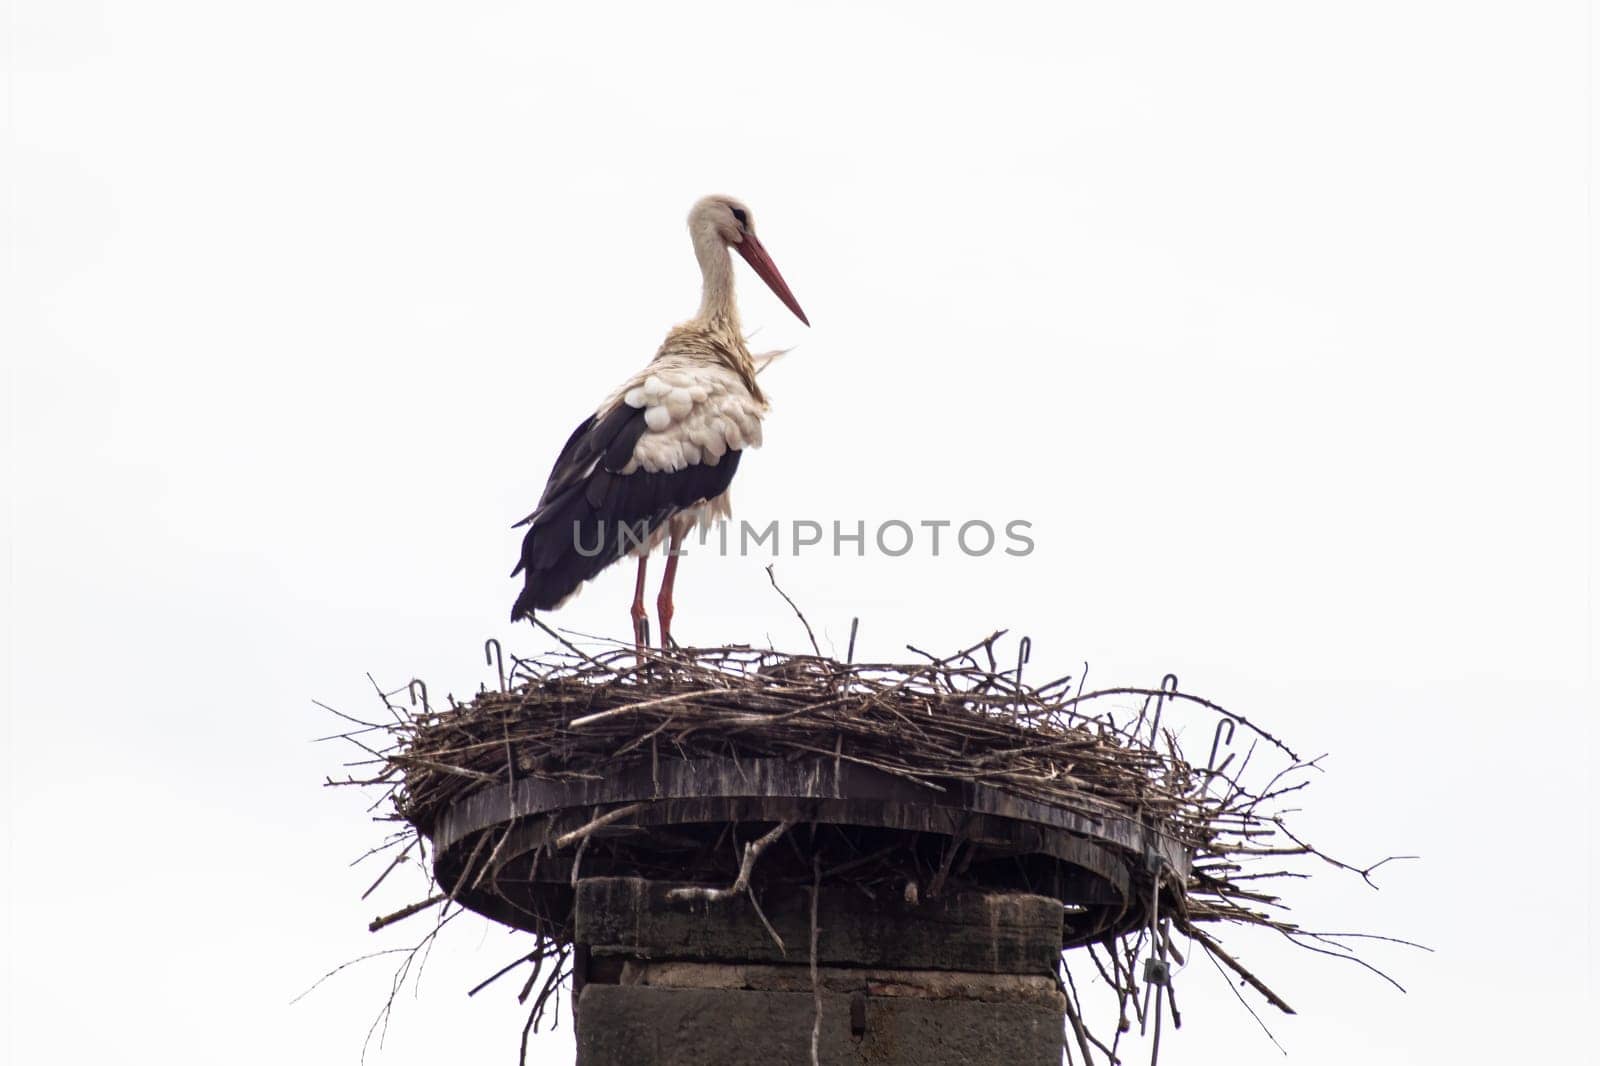 one stork (Ciconia ciconia) stands in its nest and looks over the landscape by mario_plechaty_photography